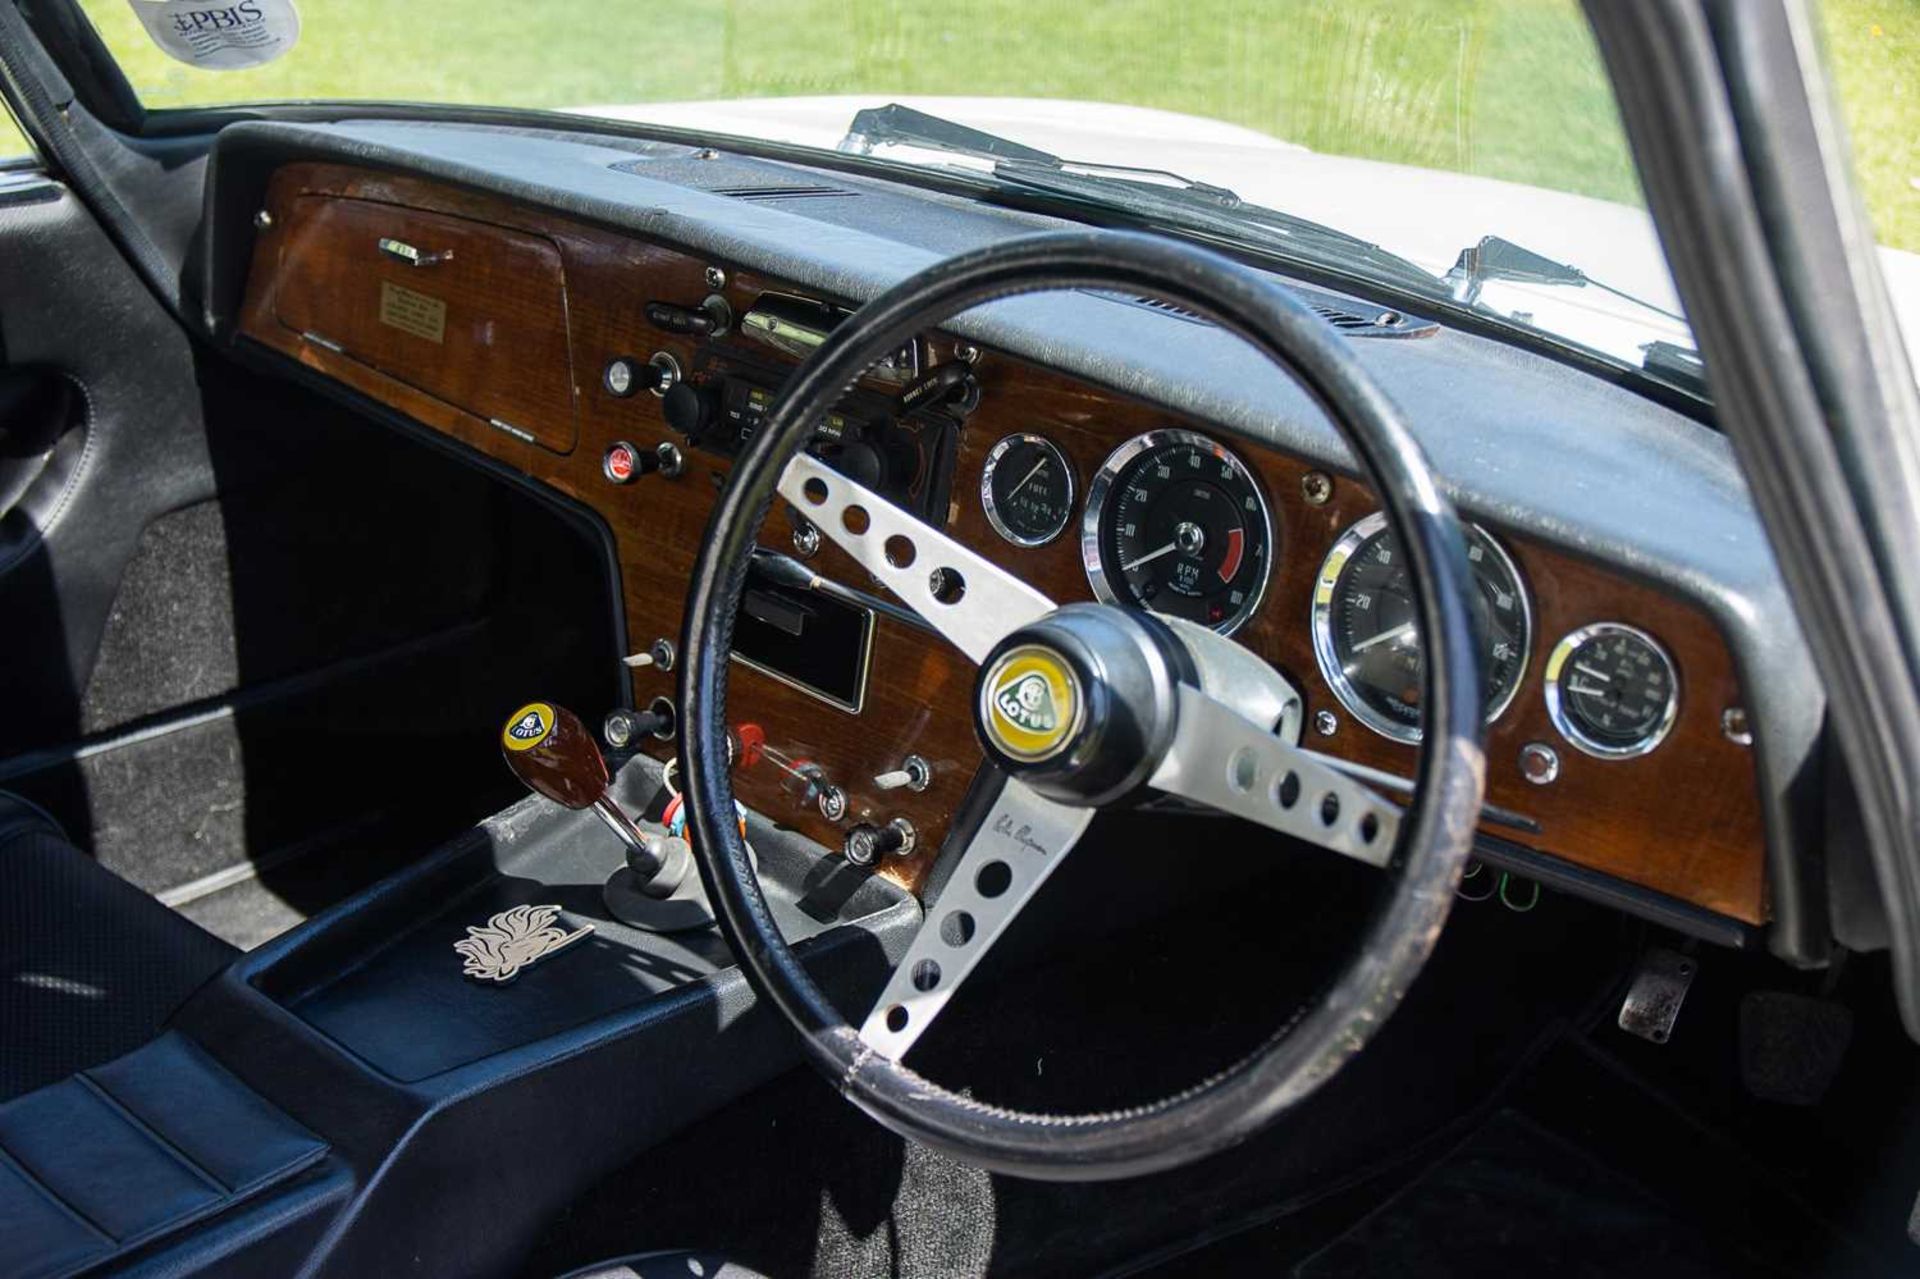 1966 Lotus Elan Fixed Head Coupe Sympathetically restored, equipped with desirable upgrades - Image 26 of 100